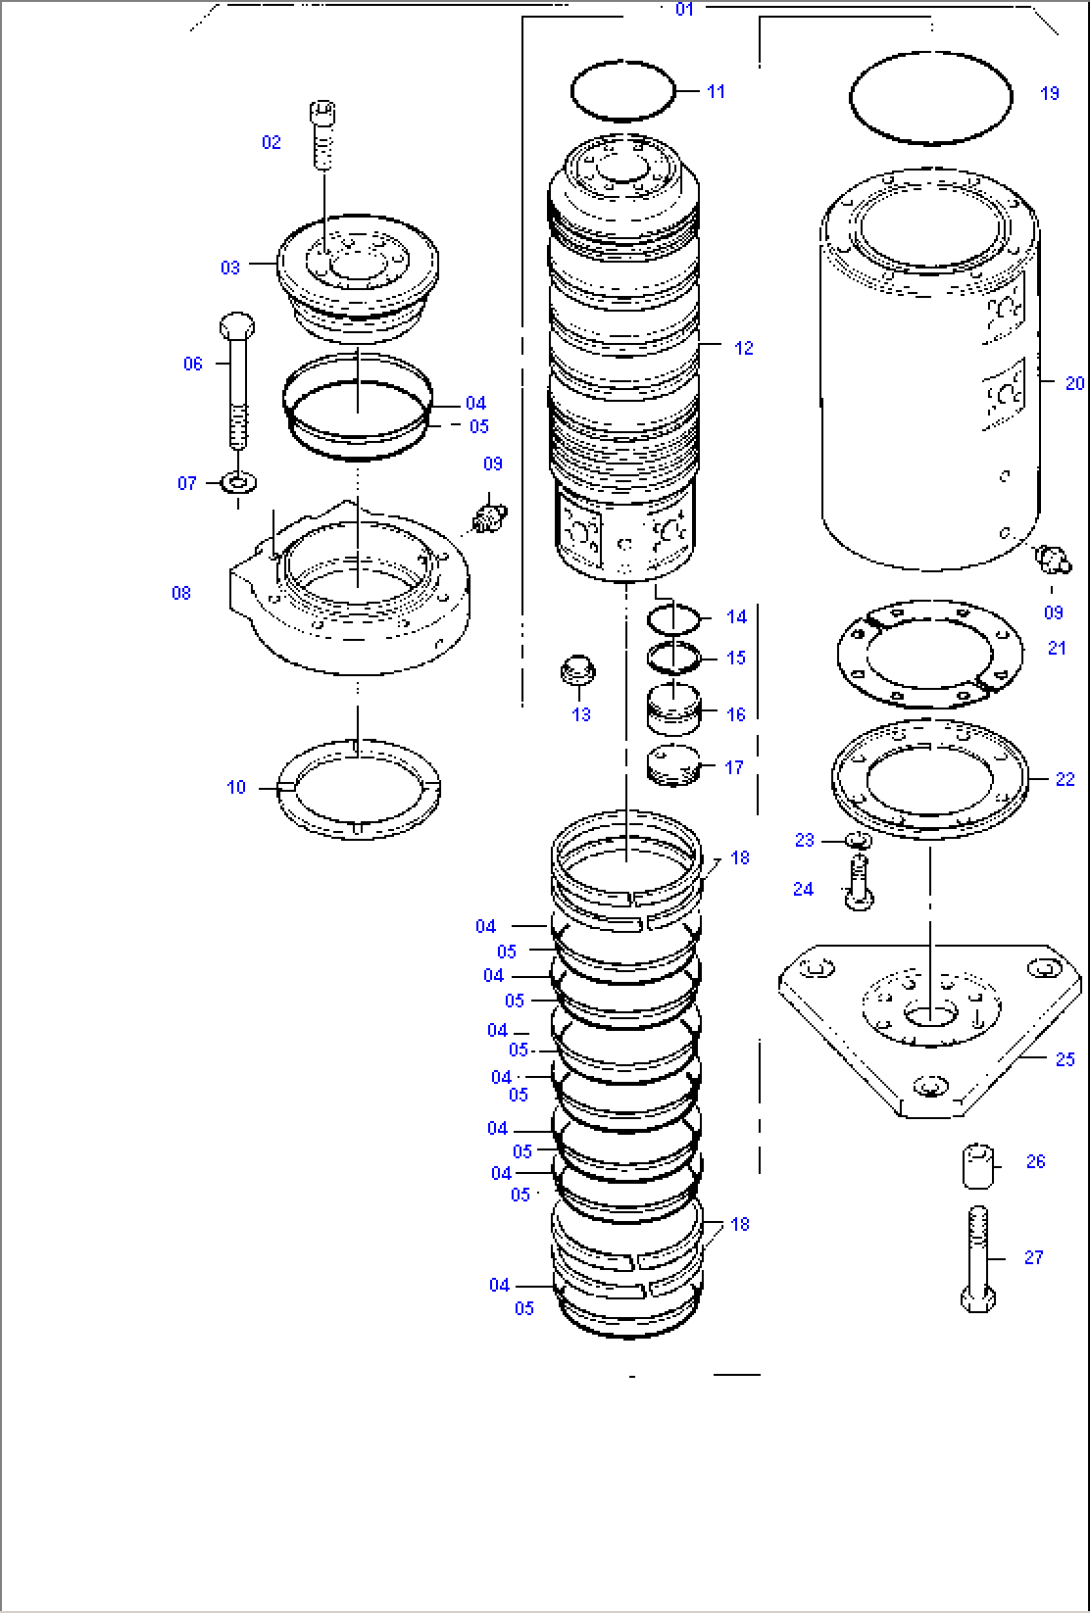 Rotary Joint